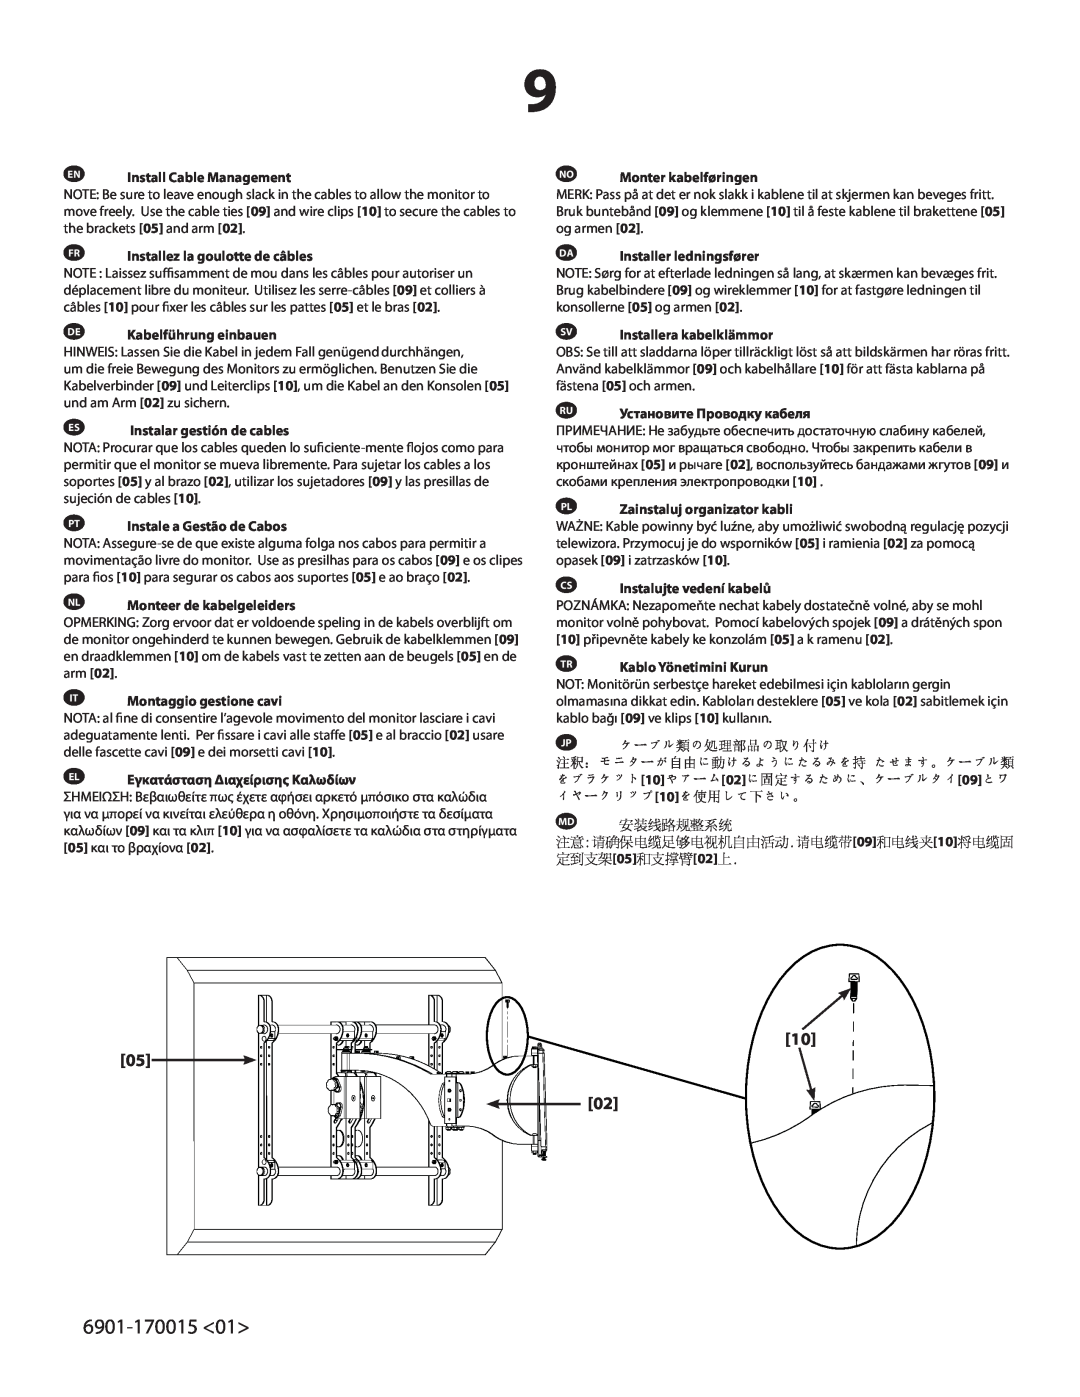 Sanus Systems VMDD26 important safety instructions 6901-170015<01>, 10 05 02, EN Install Cable Management 